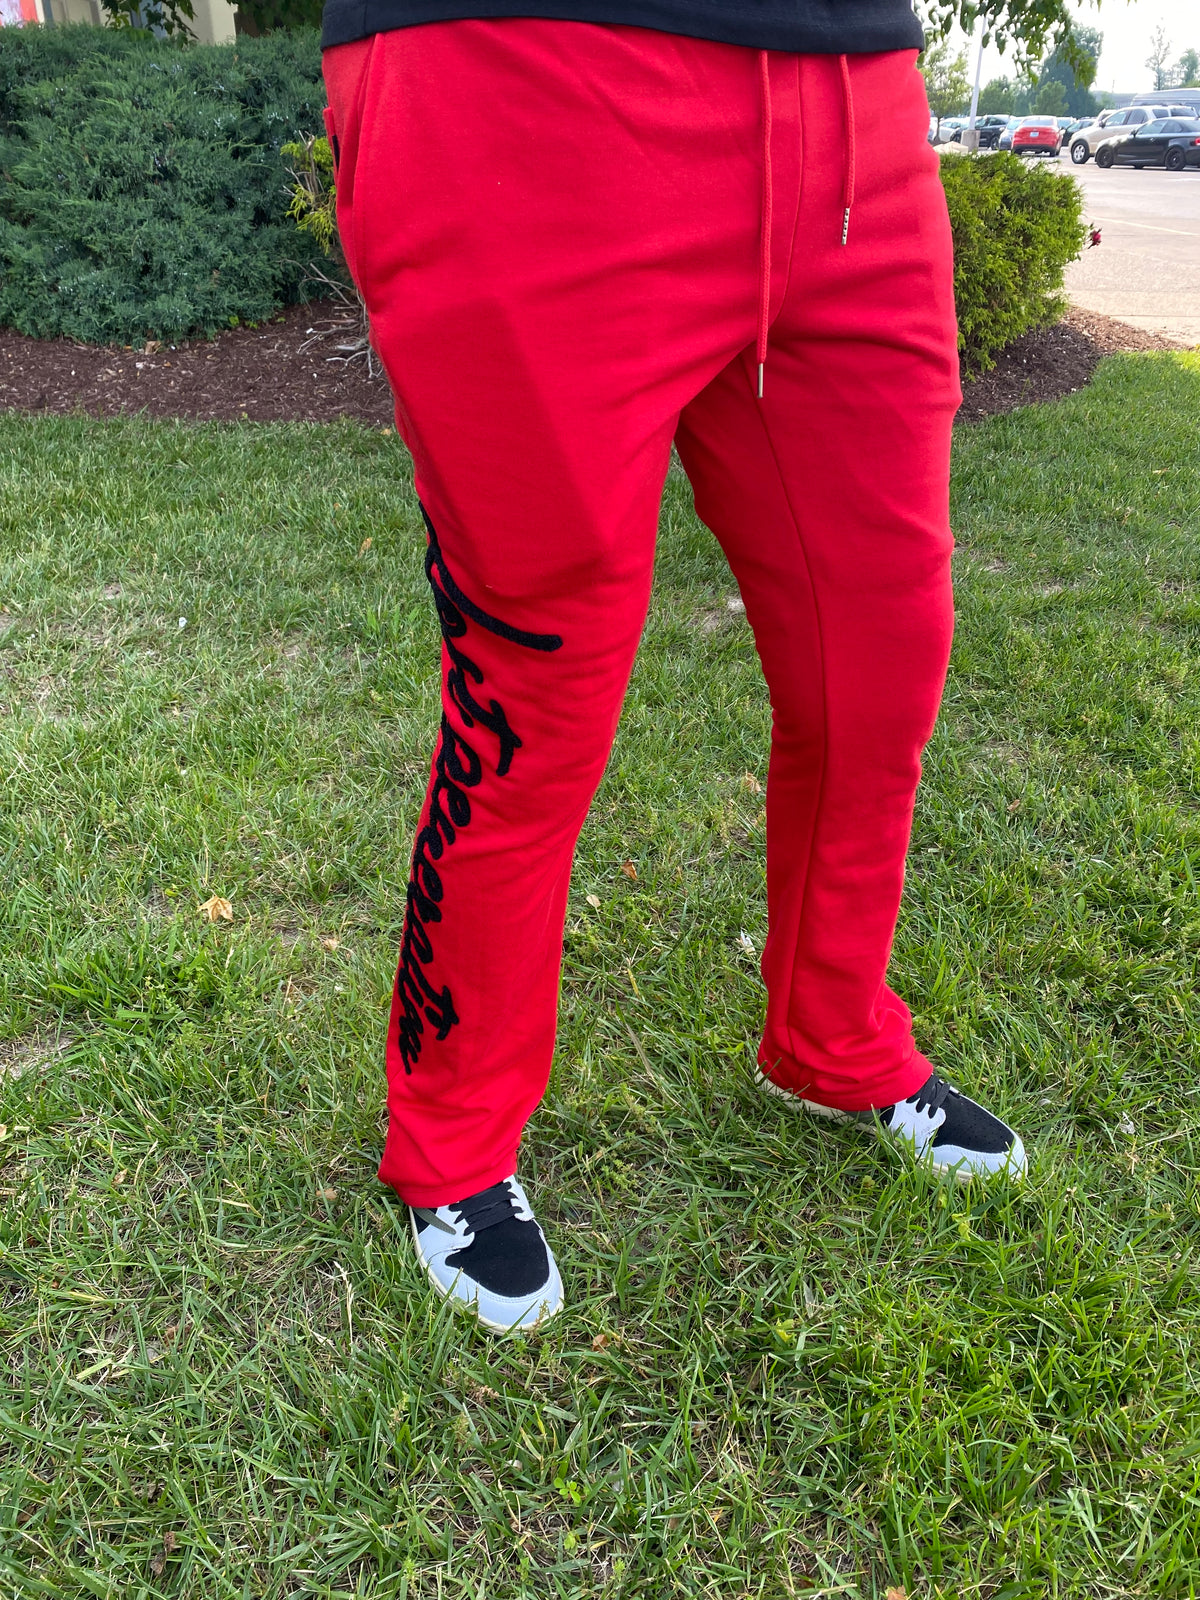 "Lost Generations" 2 Stacked Sweatpants - Red